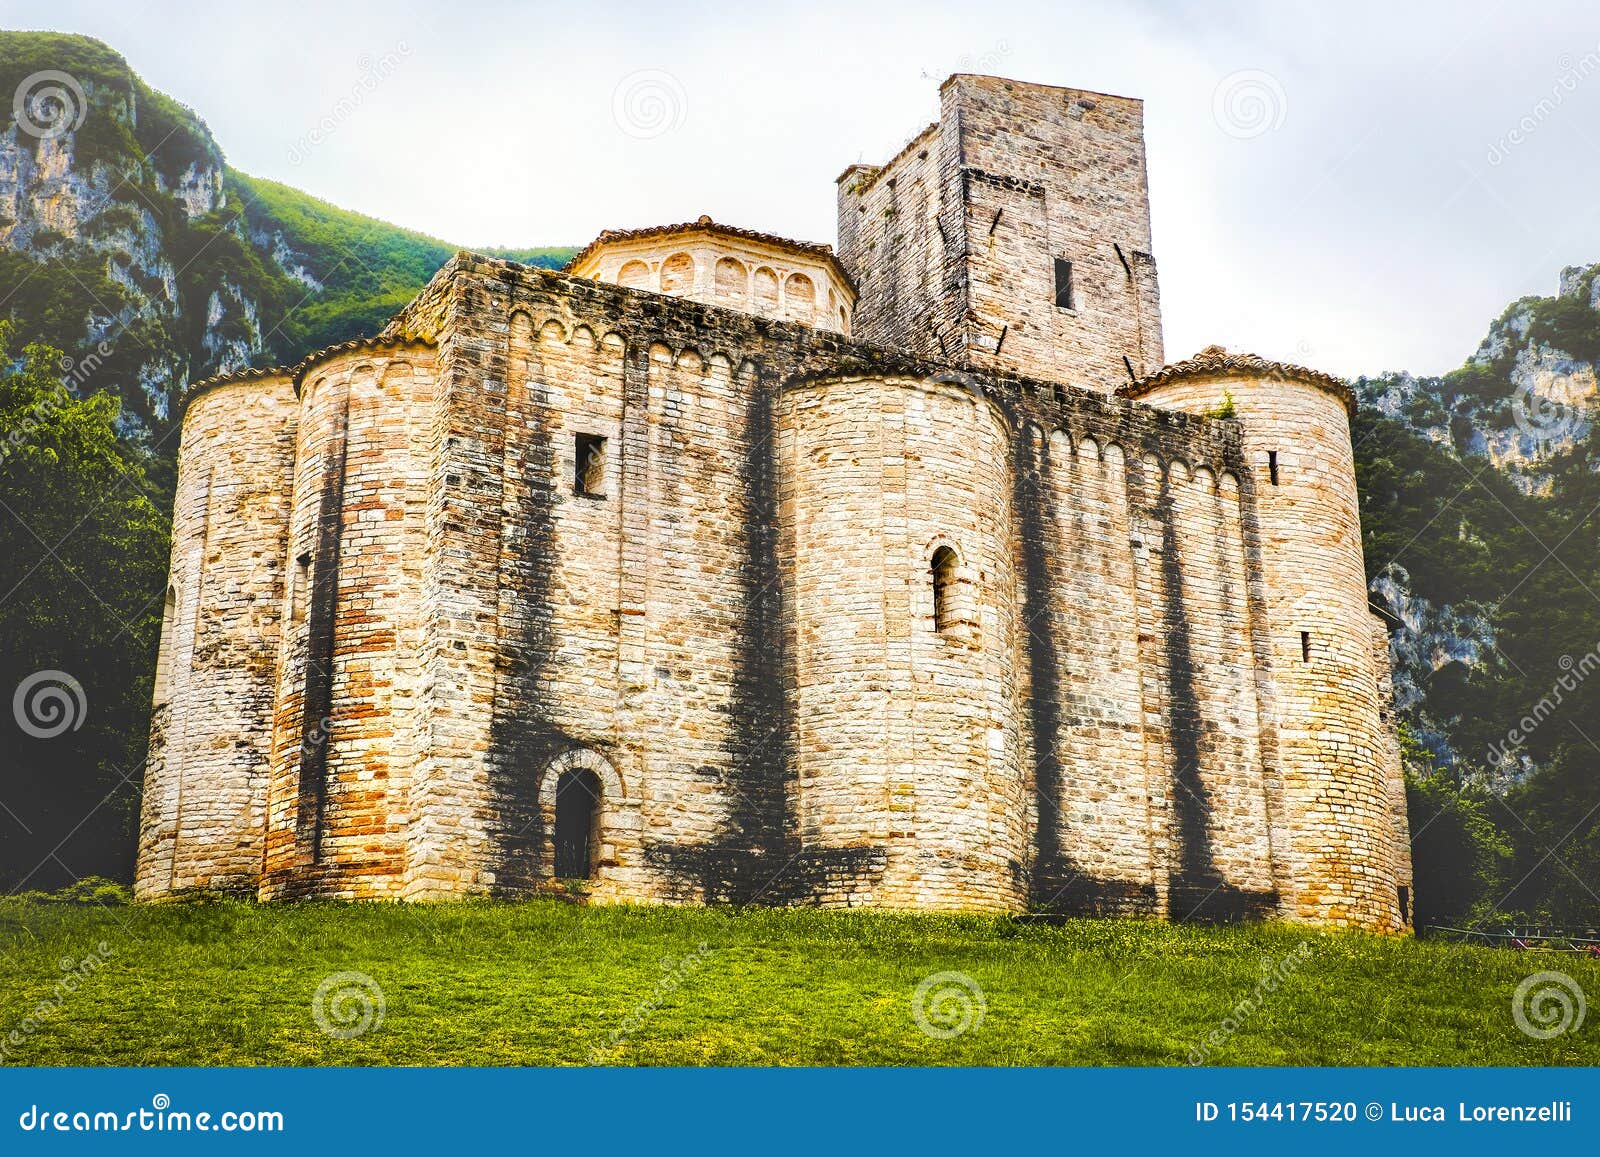 abbey of san vittore in genga - marche - italy